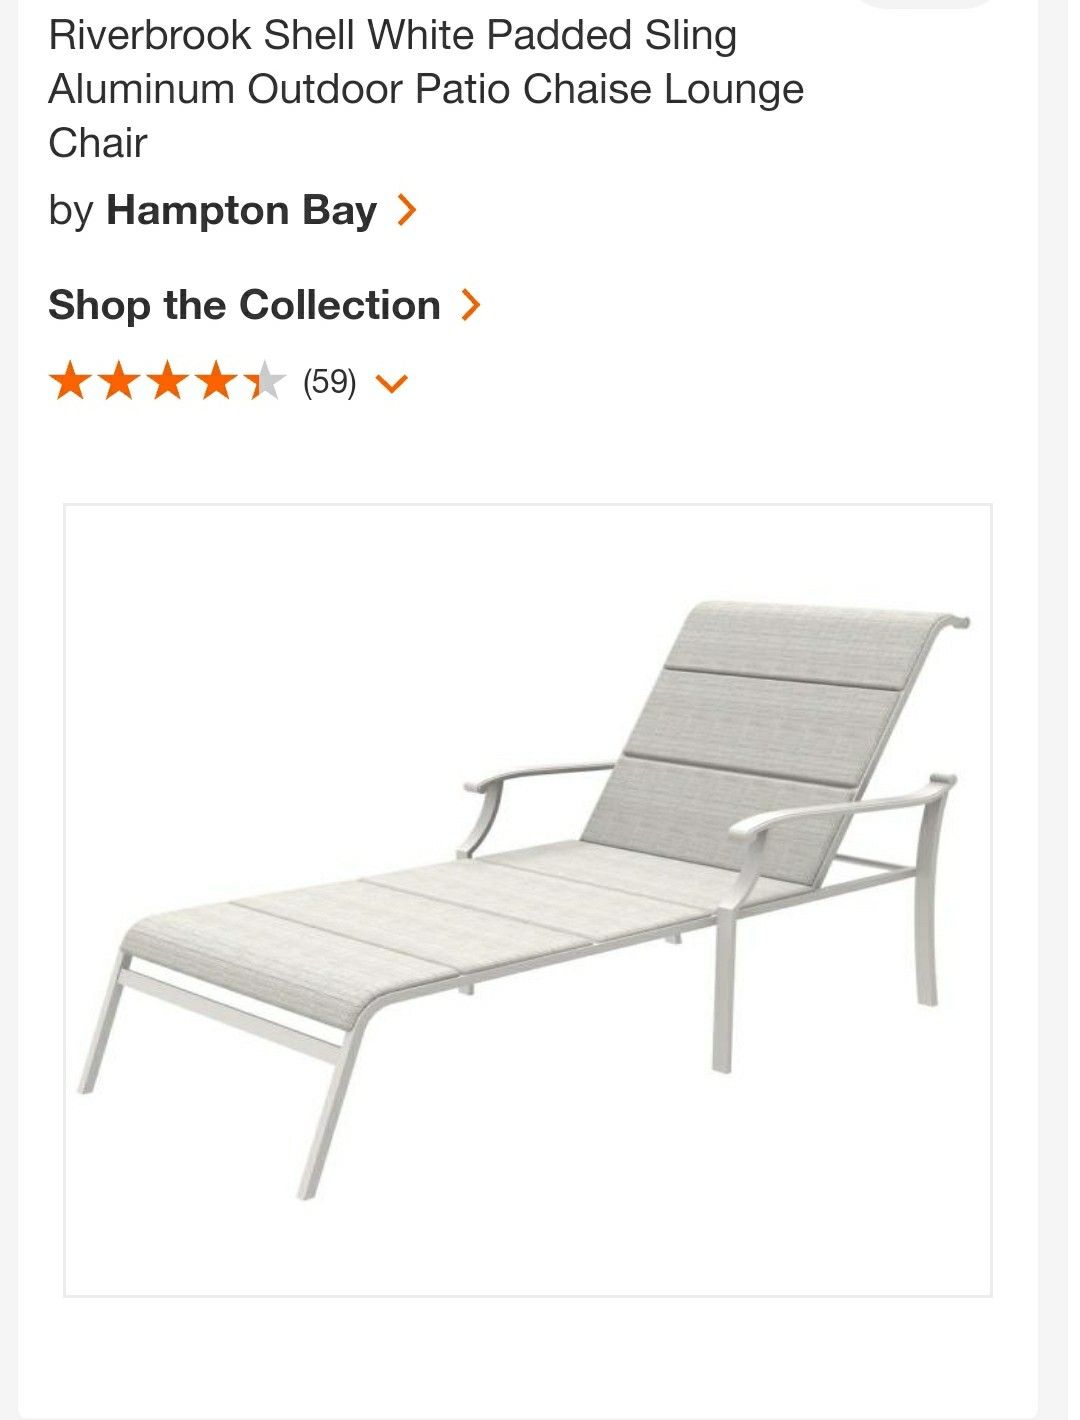 NEW IN BOX!! Padded Sling White Chaise Patio Lounge